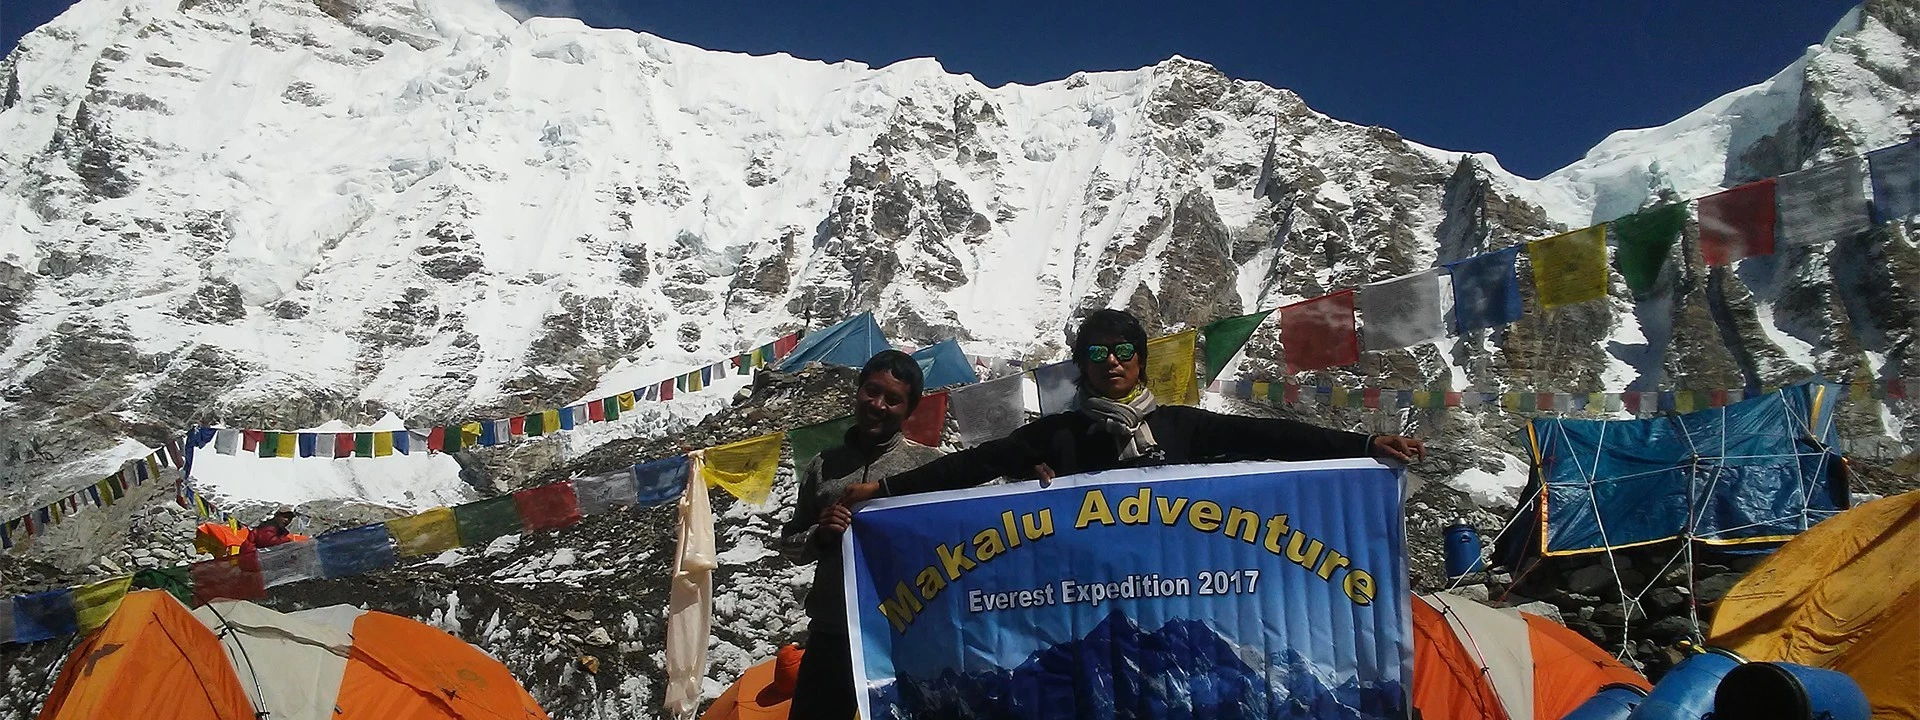 Everest Expedition via South Col Route